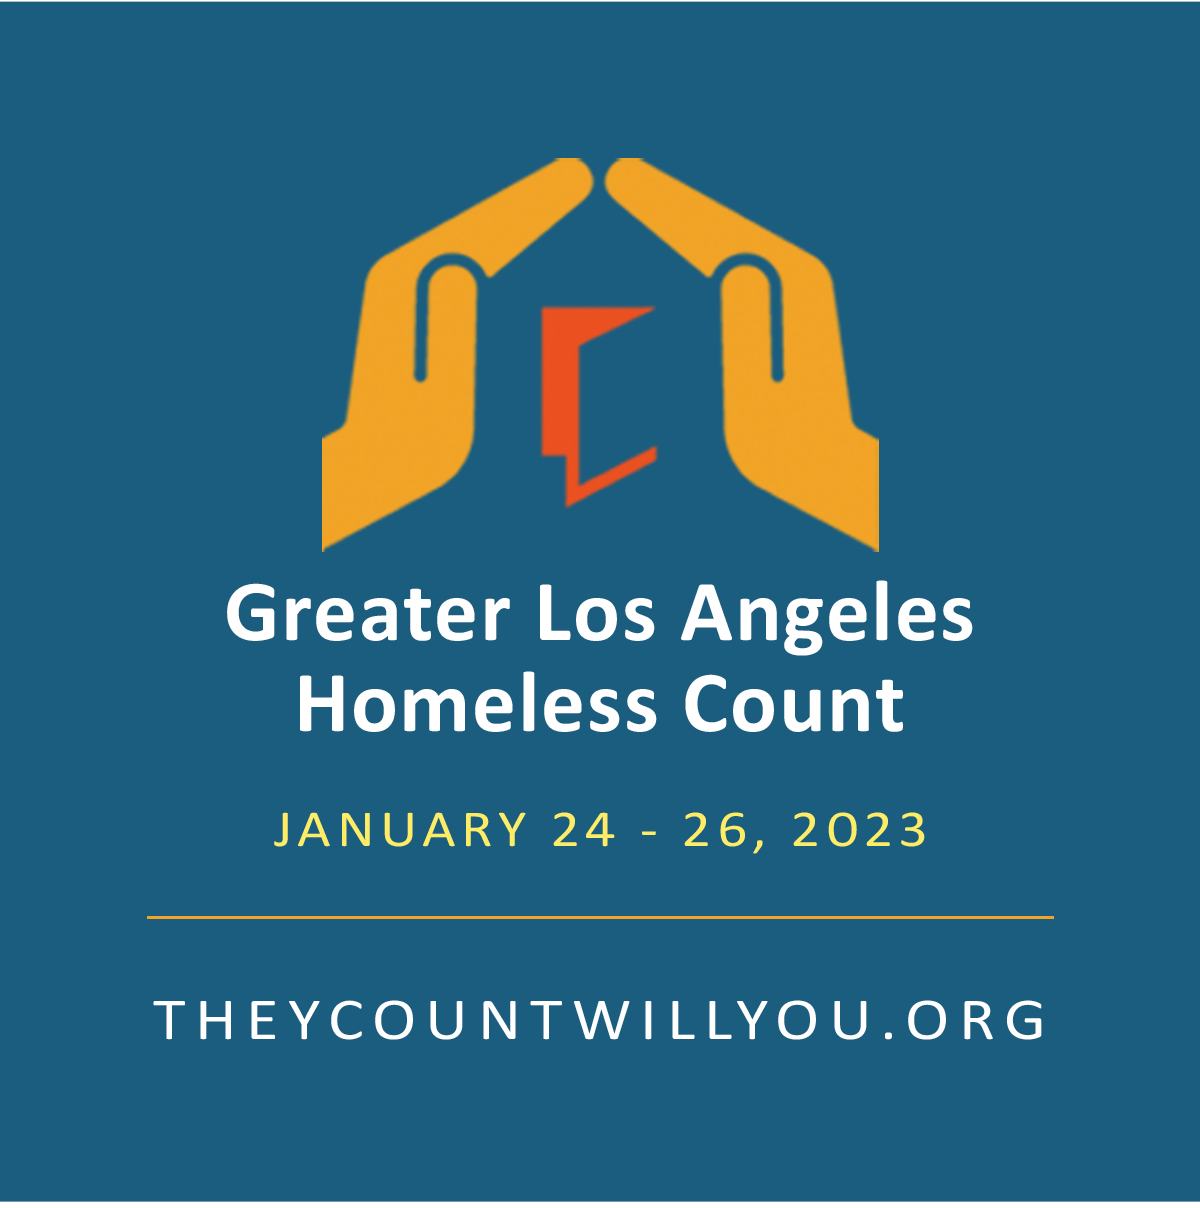 Greater Los Angeles Homeless Count